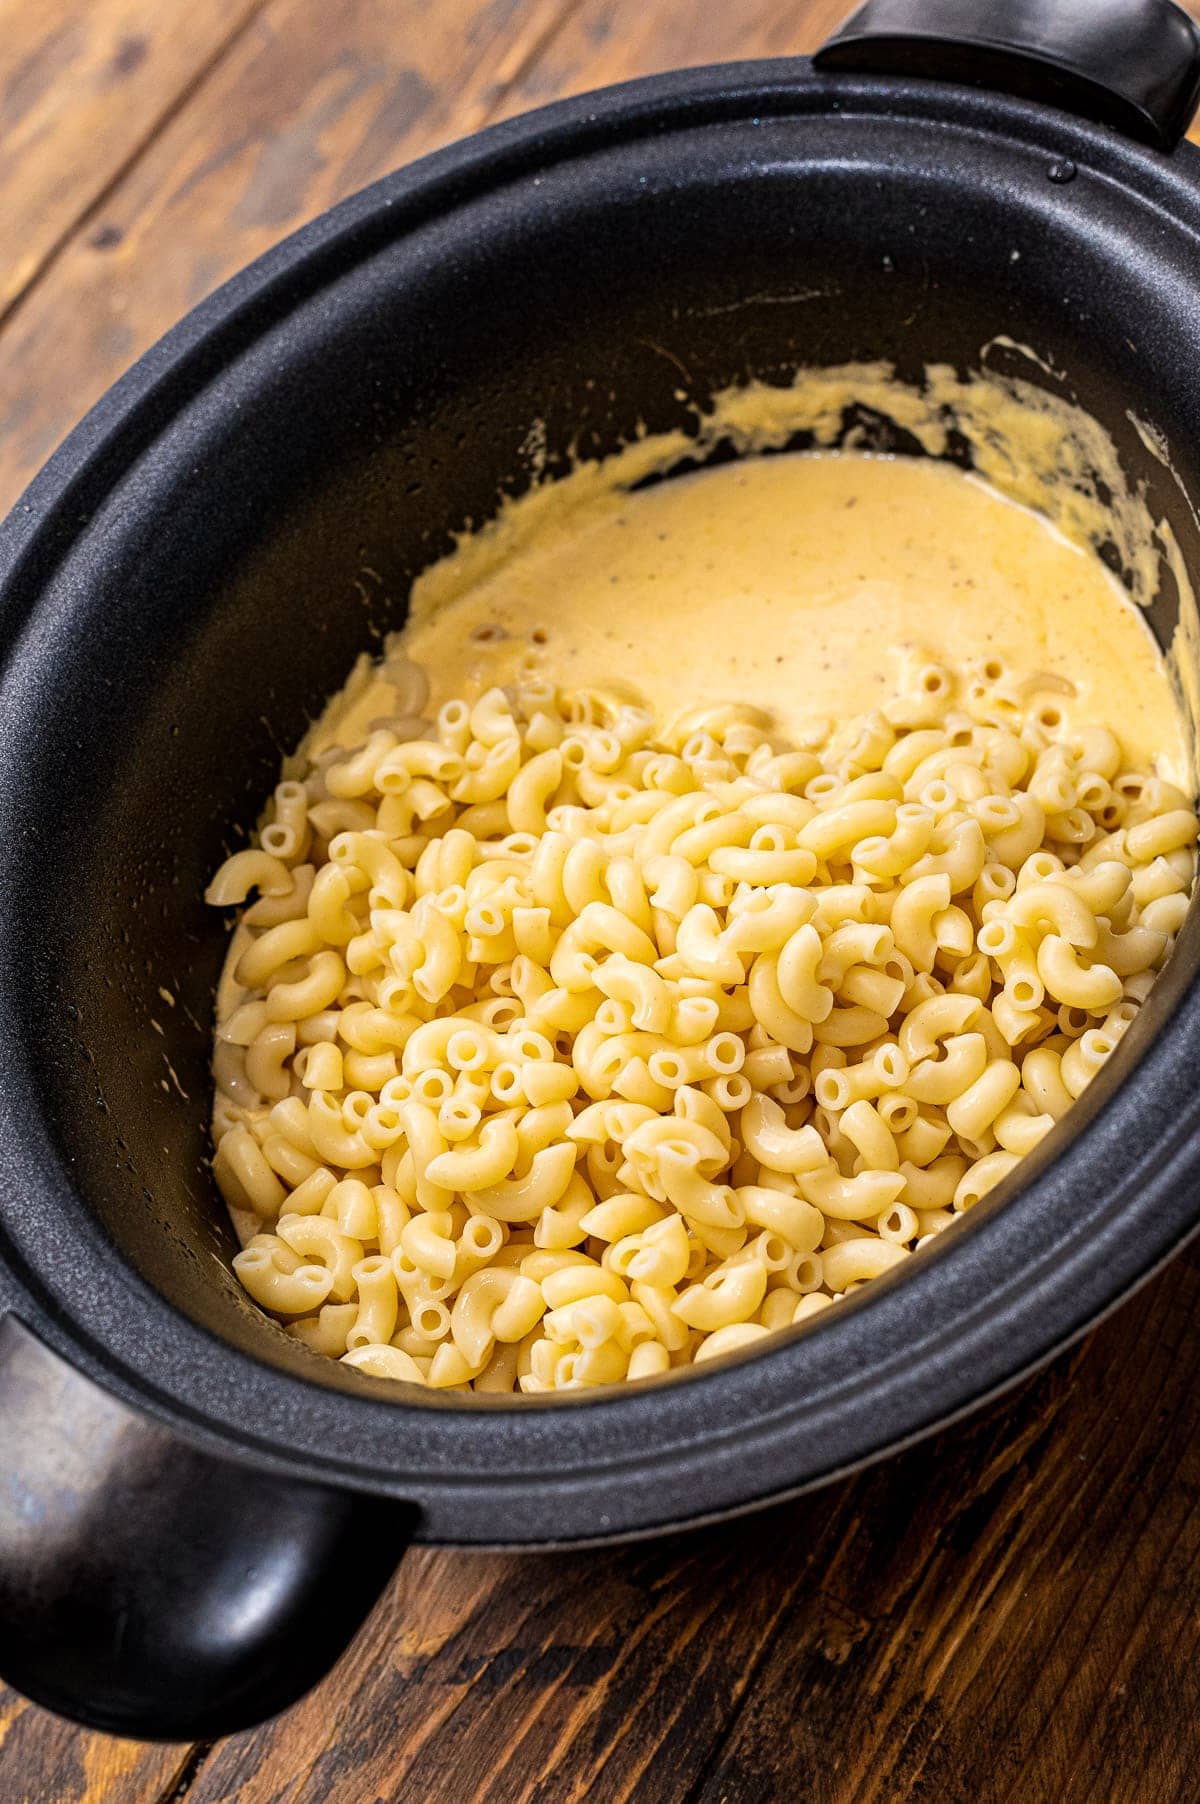 Slow Cooker with cheese sauce and cooked macaroni noodles before mixing